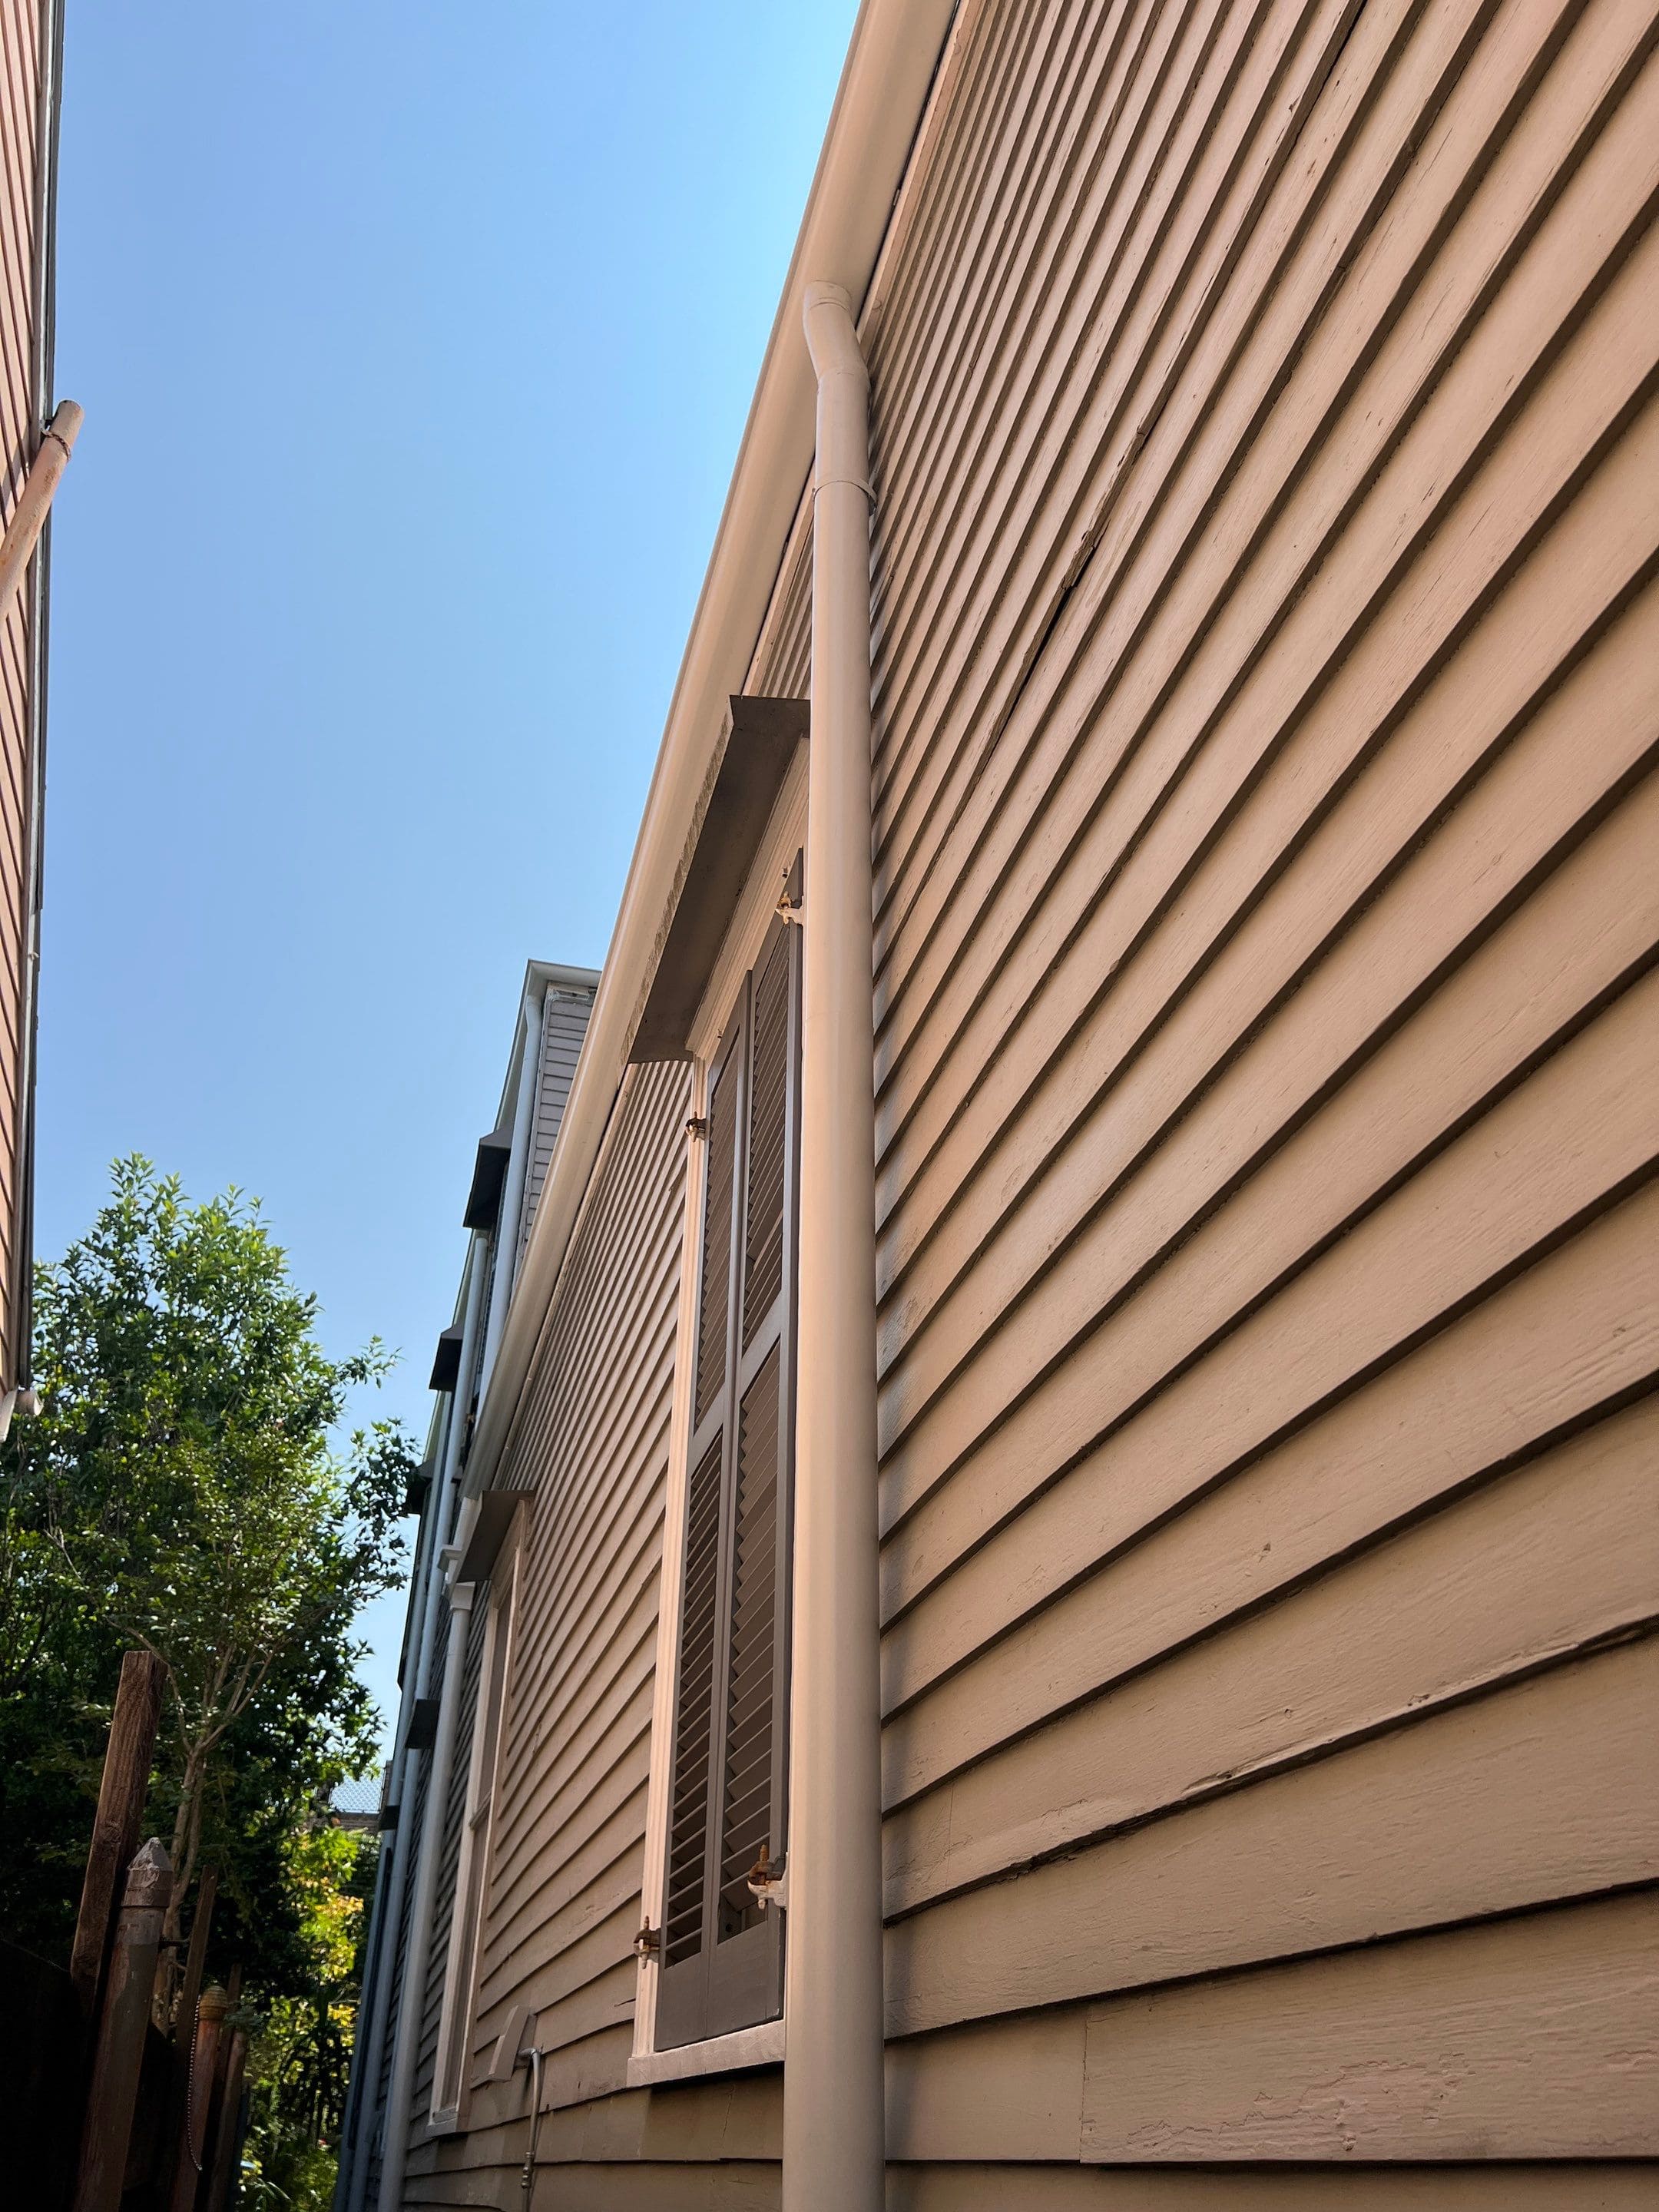 Gutter Systems Experts